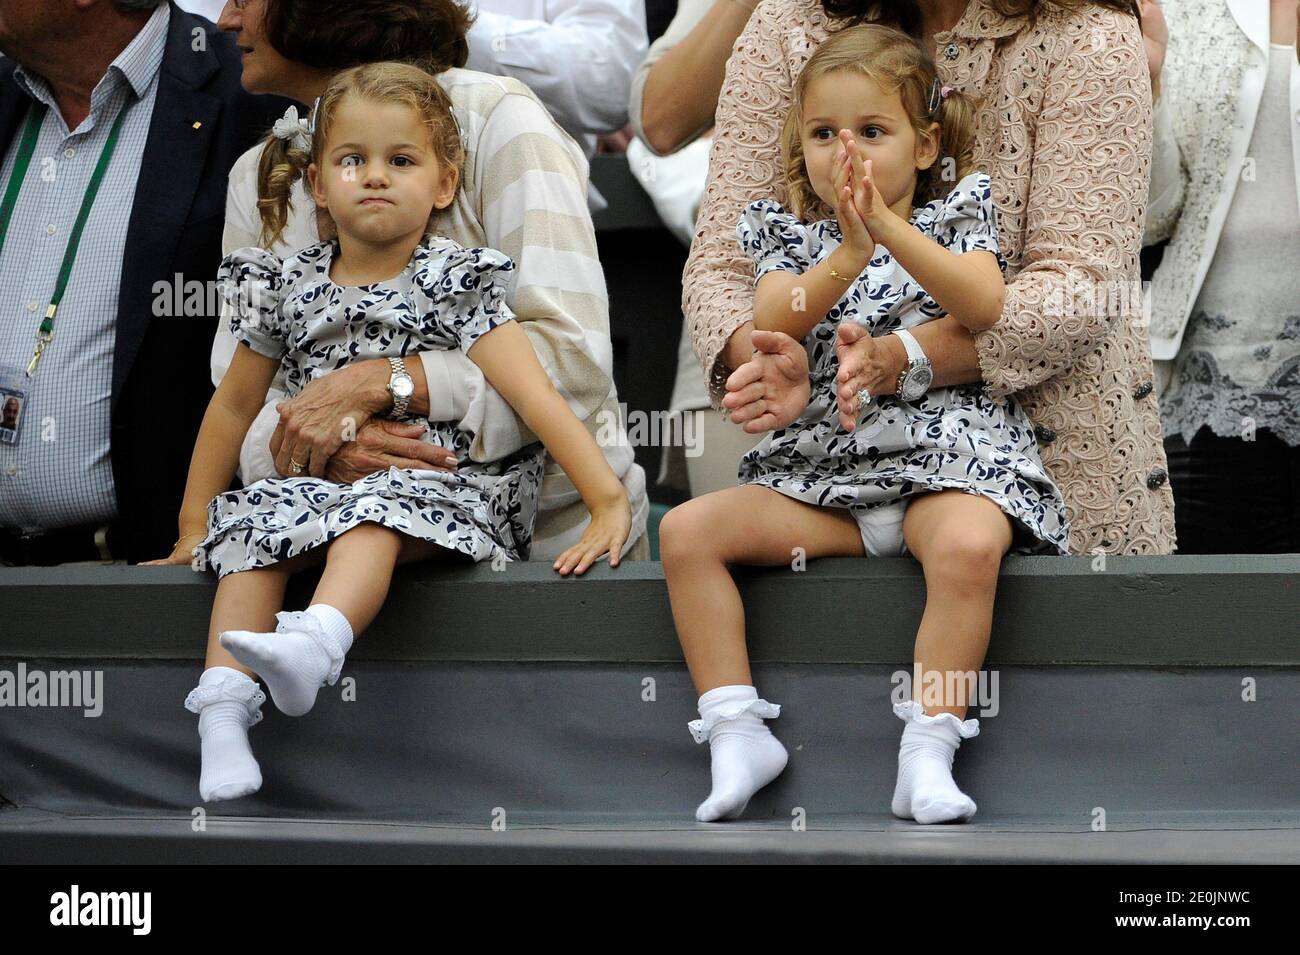 Switzerland's Roger Federer's wife Mirka Vavrinec with daughters Myla and Charlene in the Men Final during day thirteen of the 2012 Wimbledon Championships at the All England Lawn Tennis Club, Wimbledon in London, UK on July 8, 2012. Photo by Corinne Dubreuikl/ABACAPRESS.COM Stock Photo